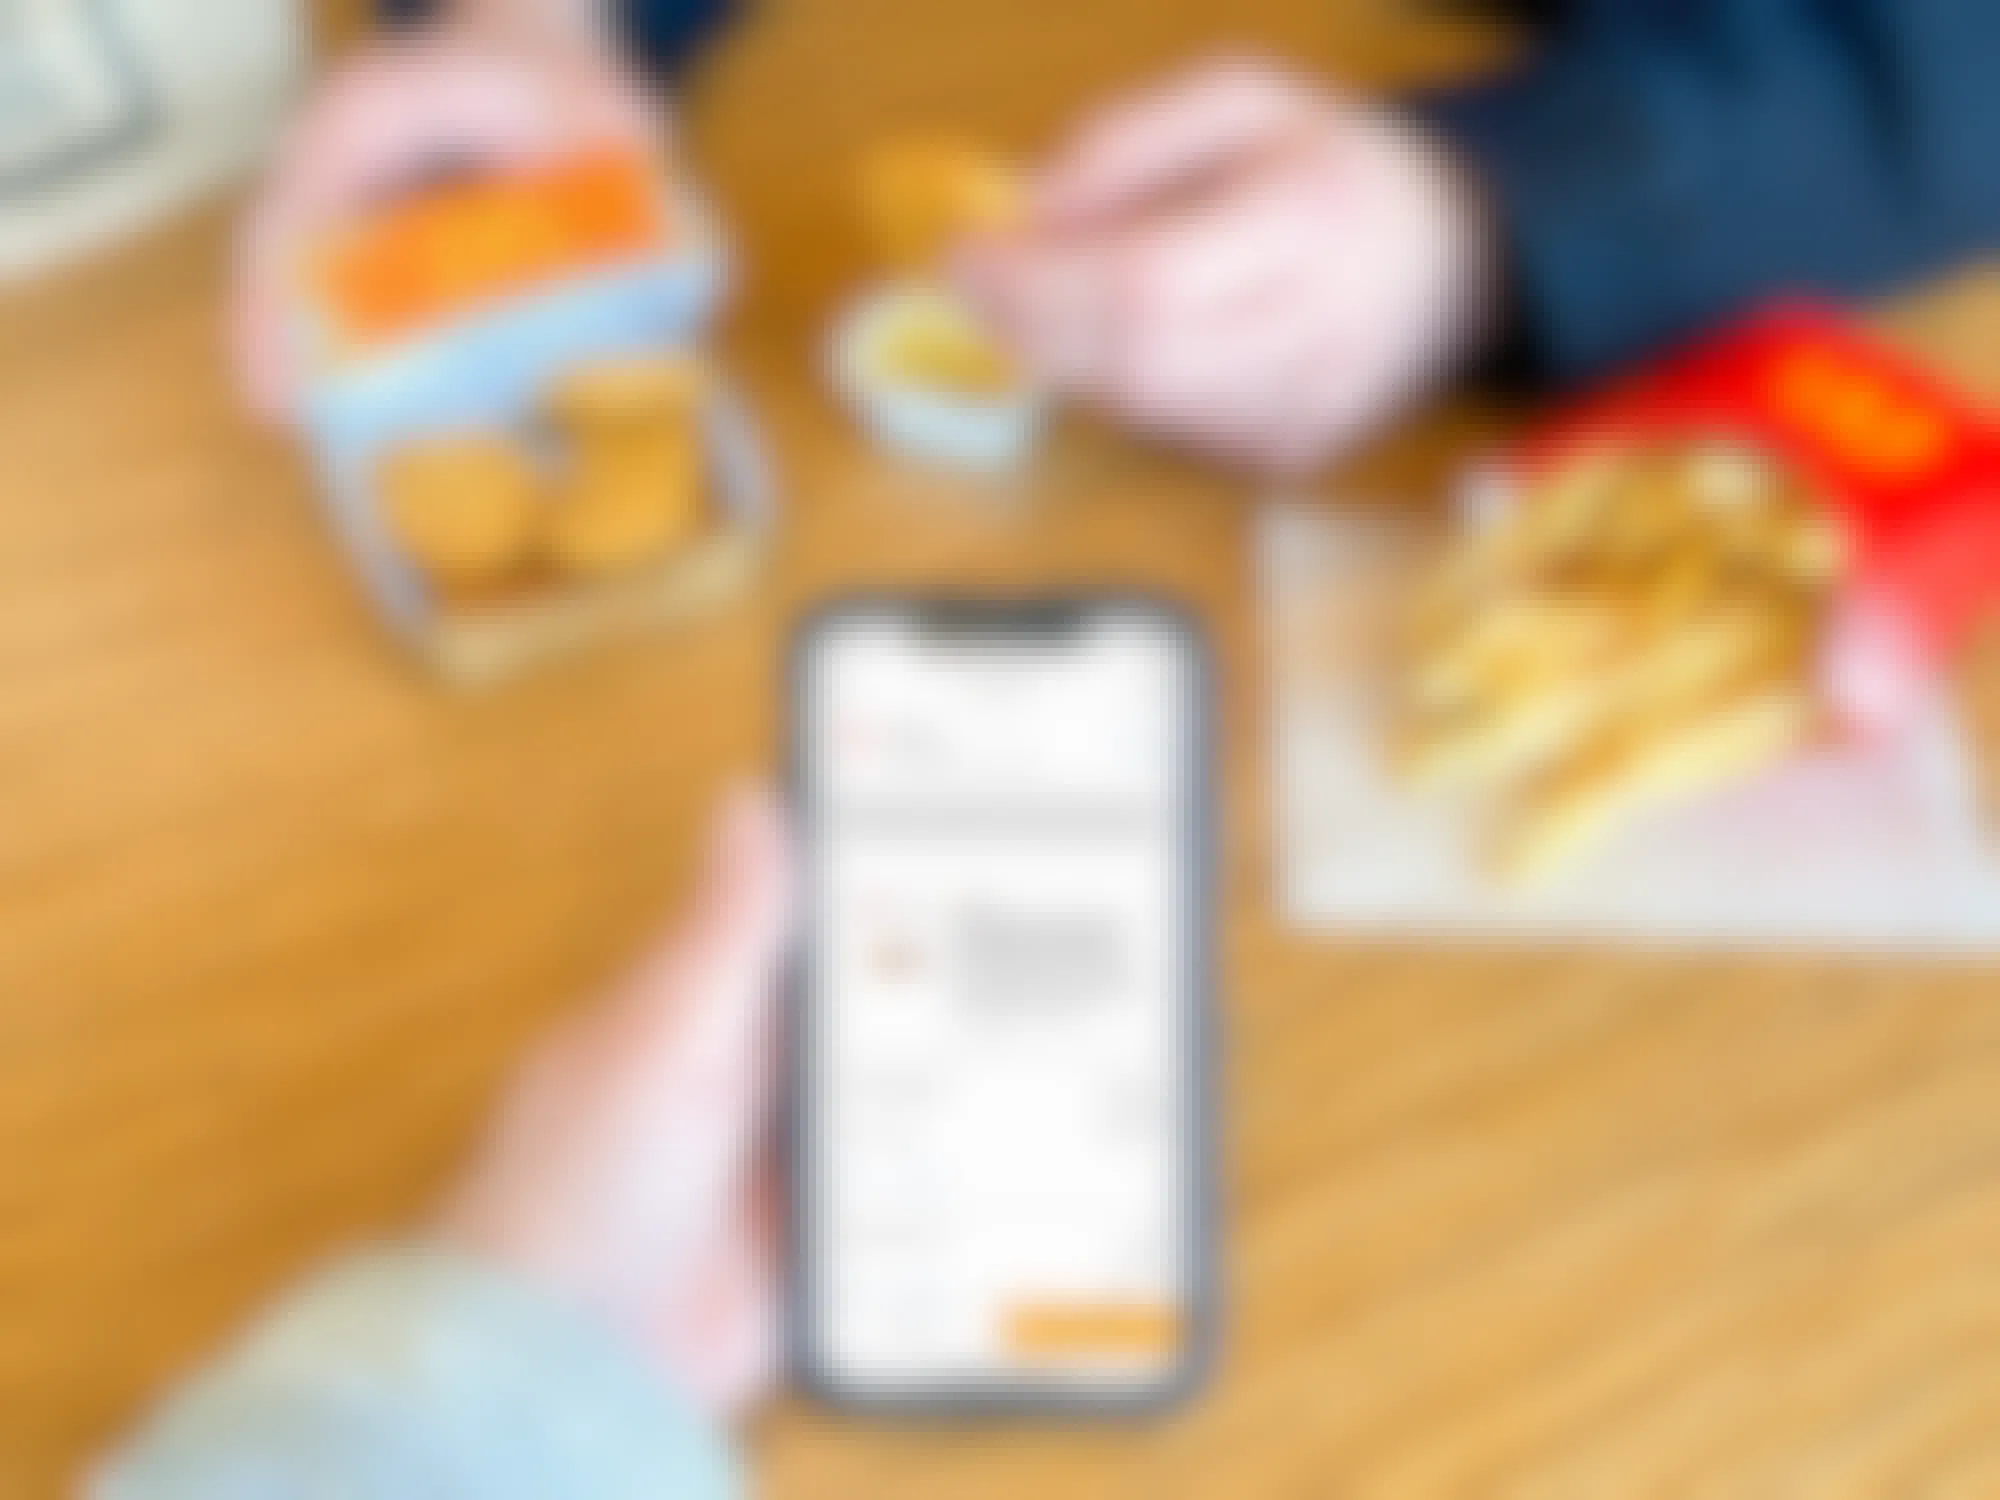 free mcdonalds six-piece chicken mcnuggets with screenshot of offer on iphone